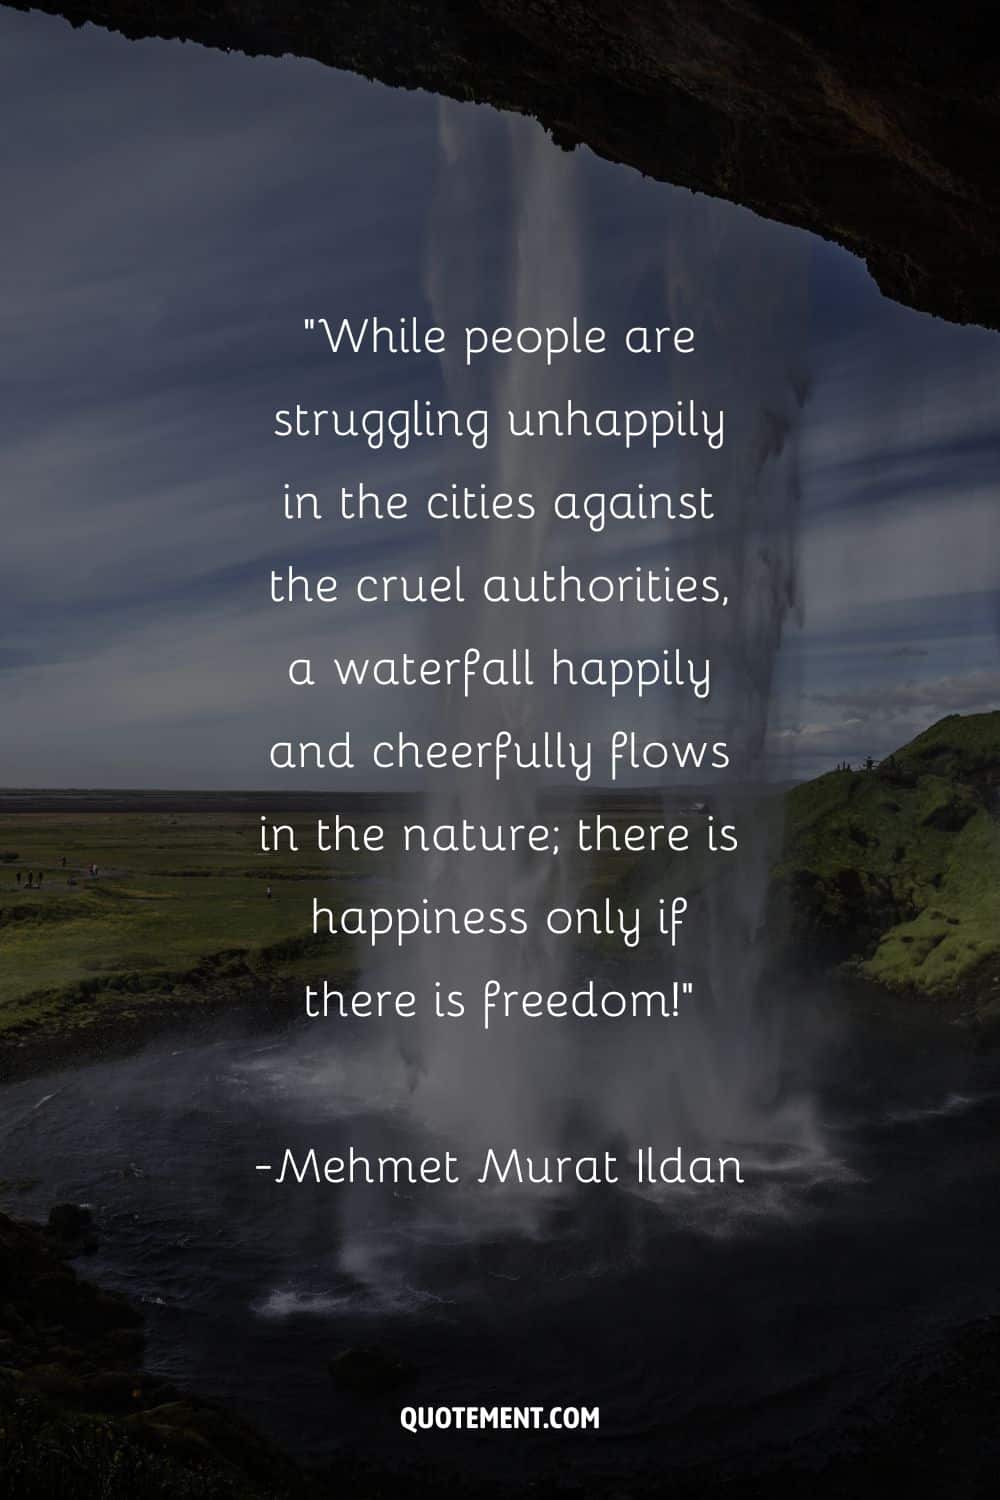 Mehmet Murat Ildan on happiness, freedom and waterfalls, and a waterfall in the background
